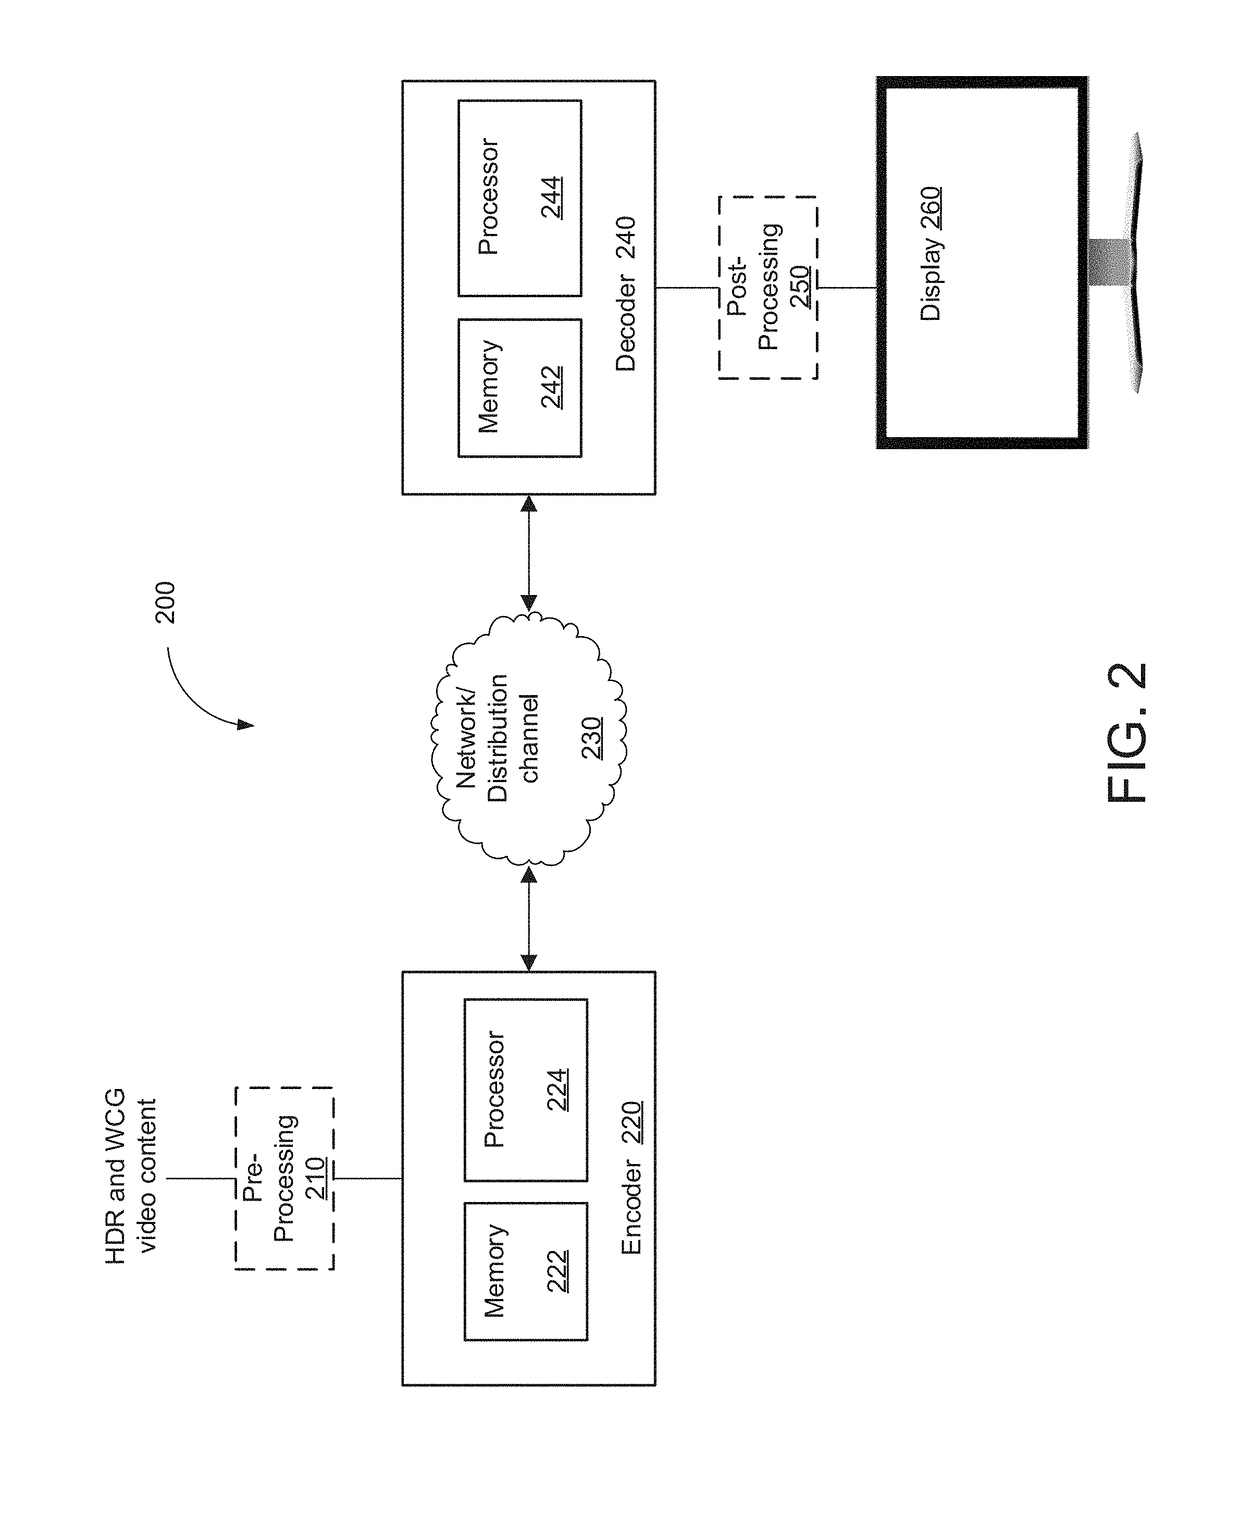 Pipeline for high dynamic range video coding based on luminance independent chromaticity preprocessing